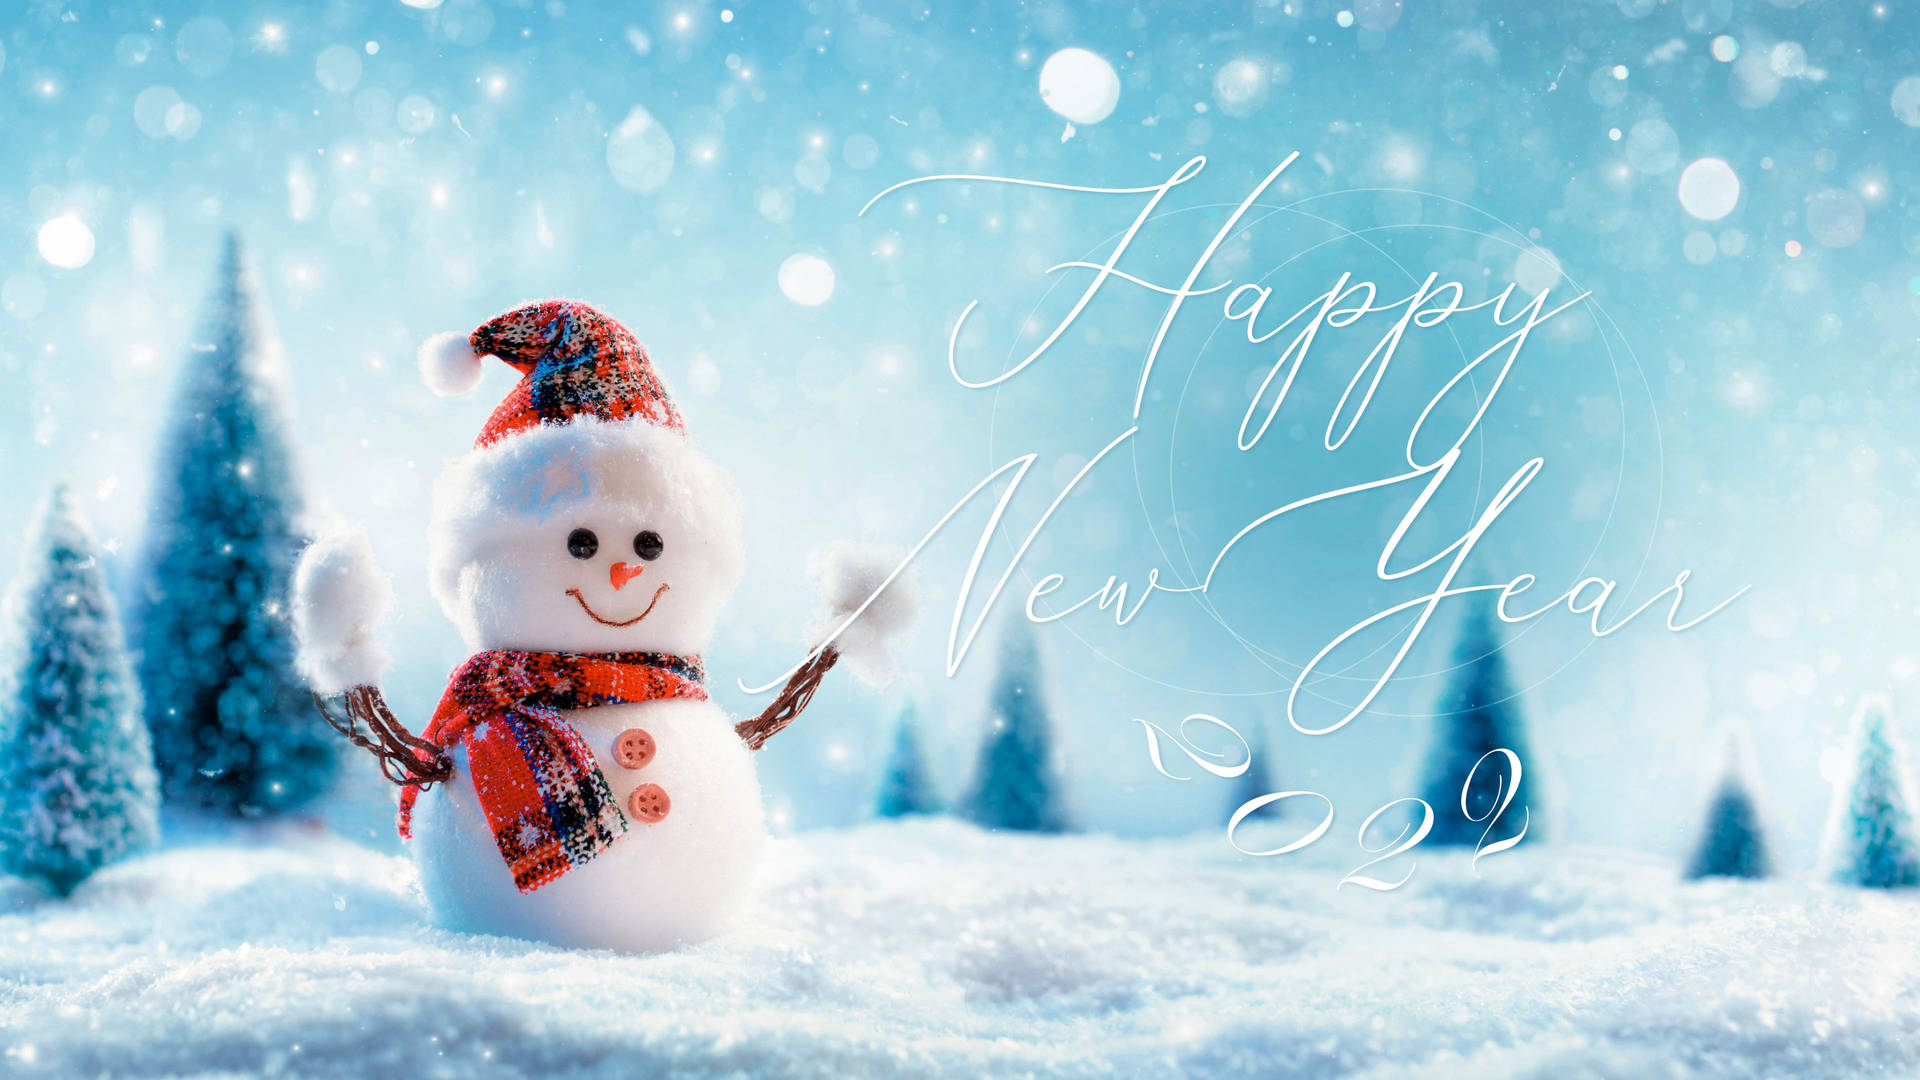 Welcome 2022! Celebrate The Year With Joy And Cheer | Happy New Year 2022 Celebration Image Background